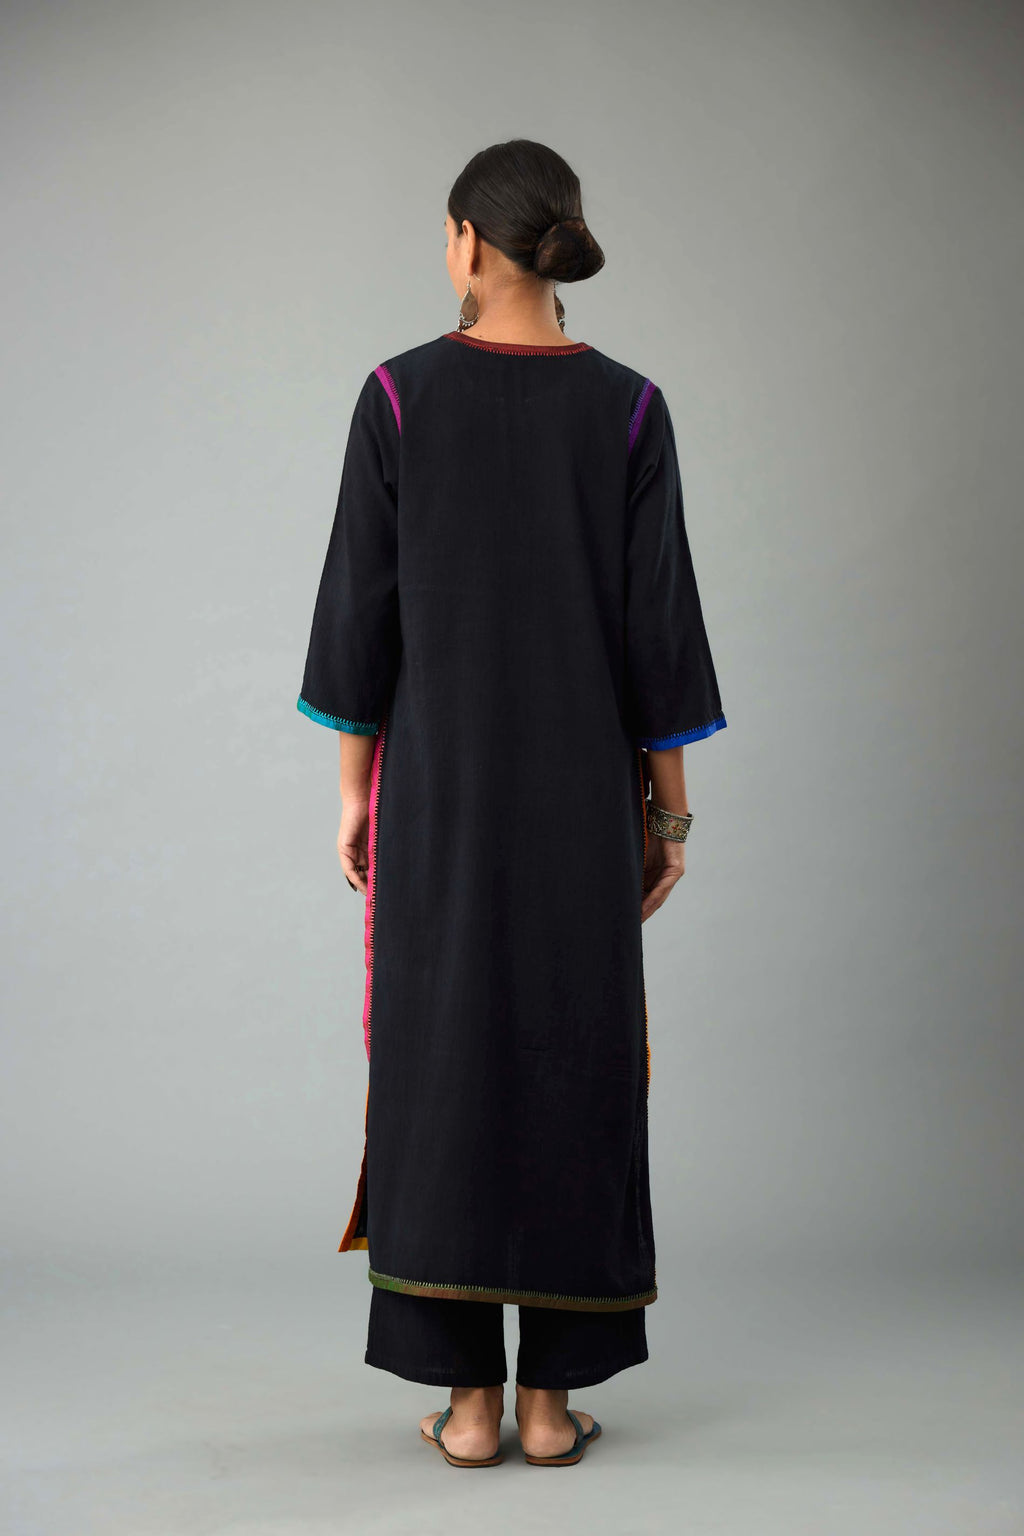 Black handloom cotton straight kurta with slit neck, multi colored silk facings and embroidery detail.